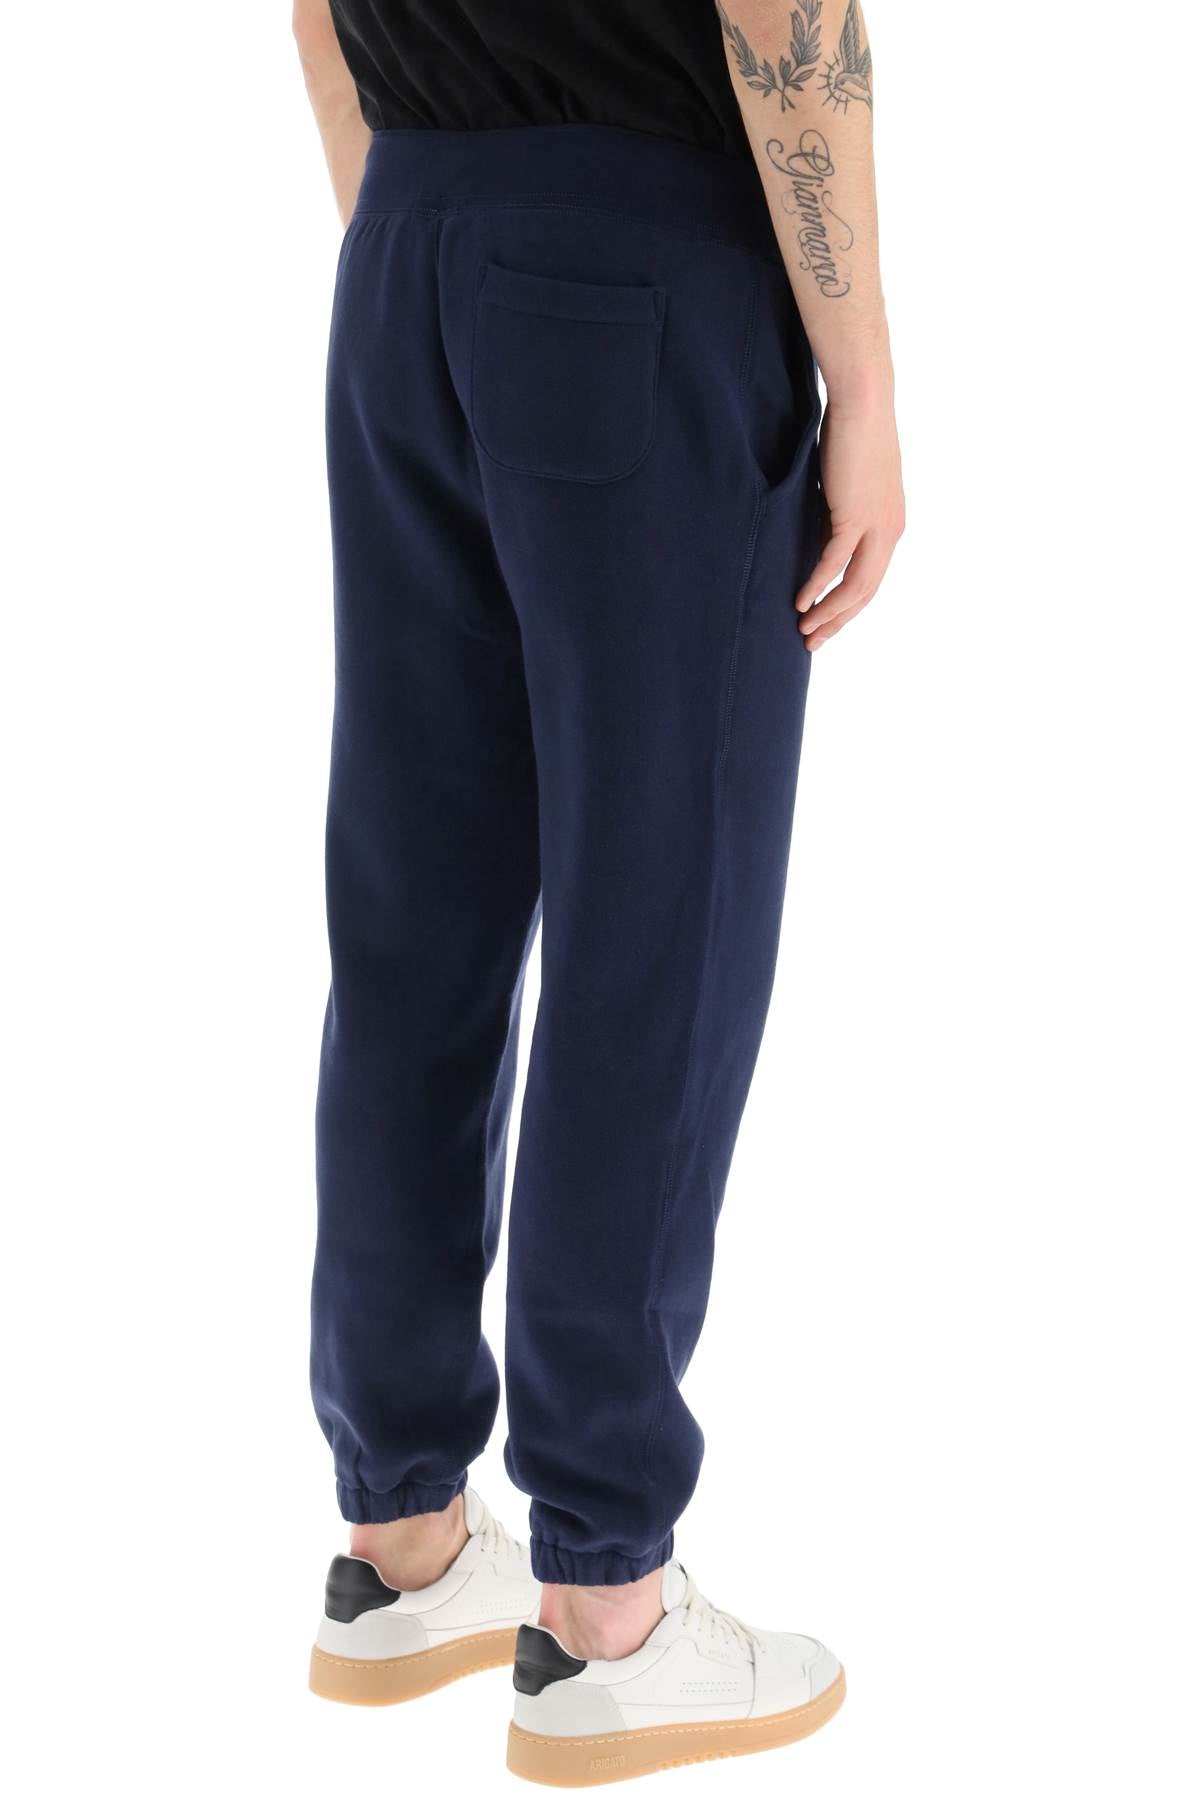 Polo ralph lauren jogger pants with embroidered logo